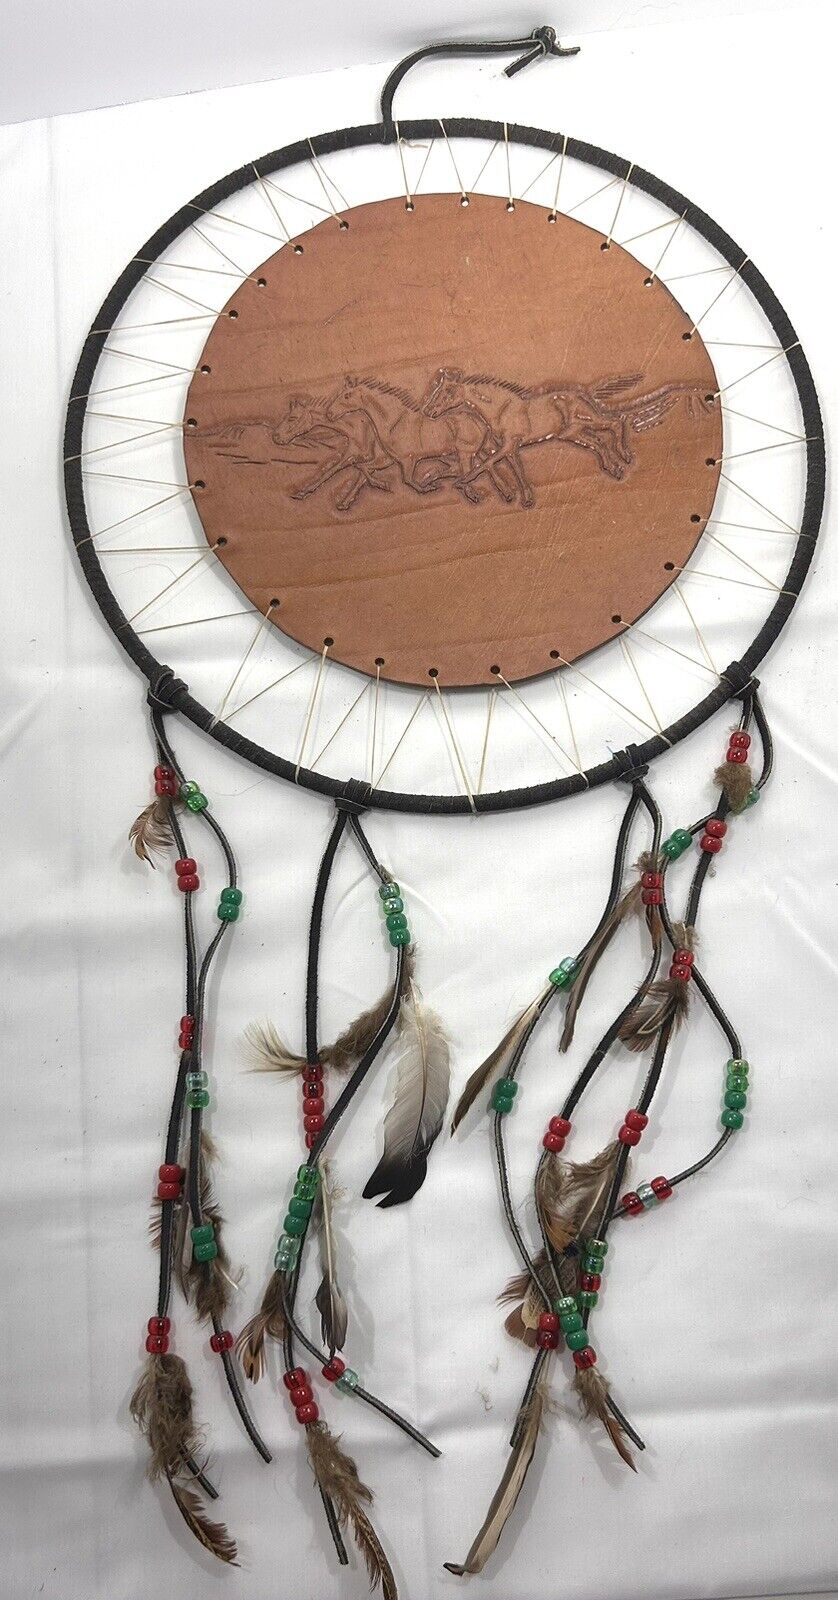 Horse Leather Dream Catcher Beads Feathers Vintage Southwest Native American